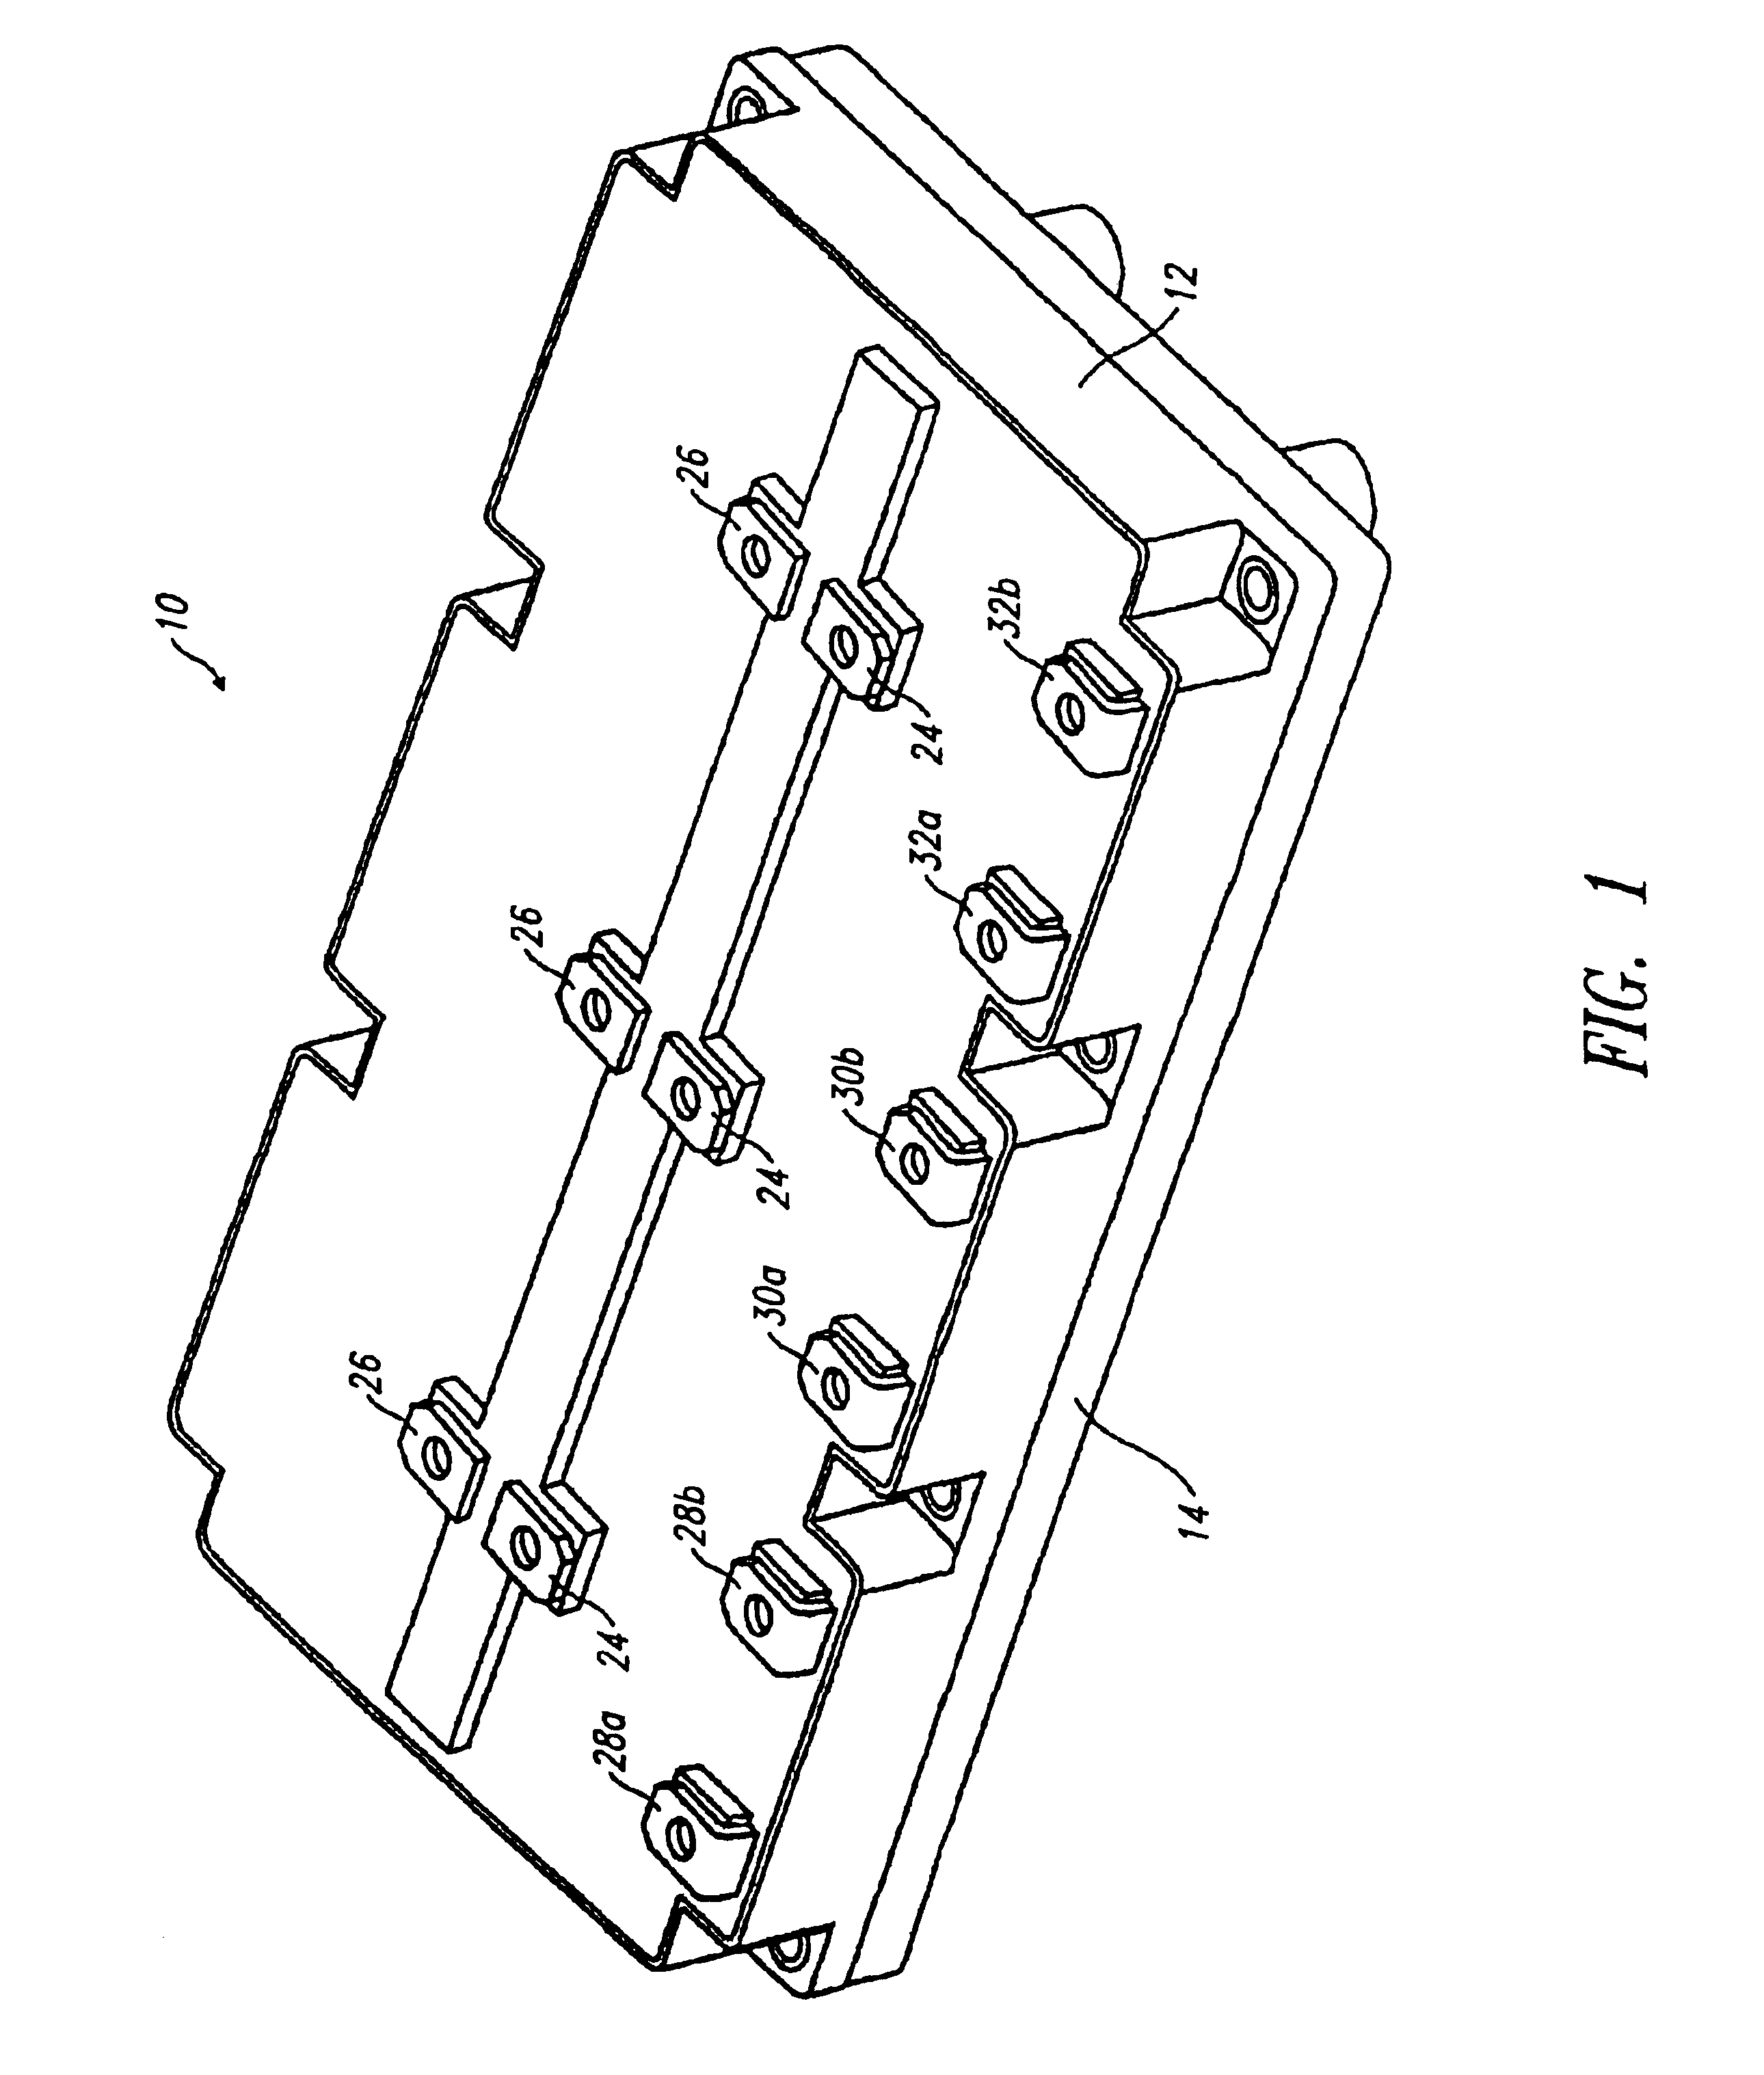 Power module with voltage overshoot limiting